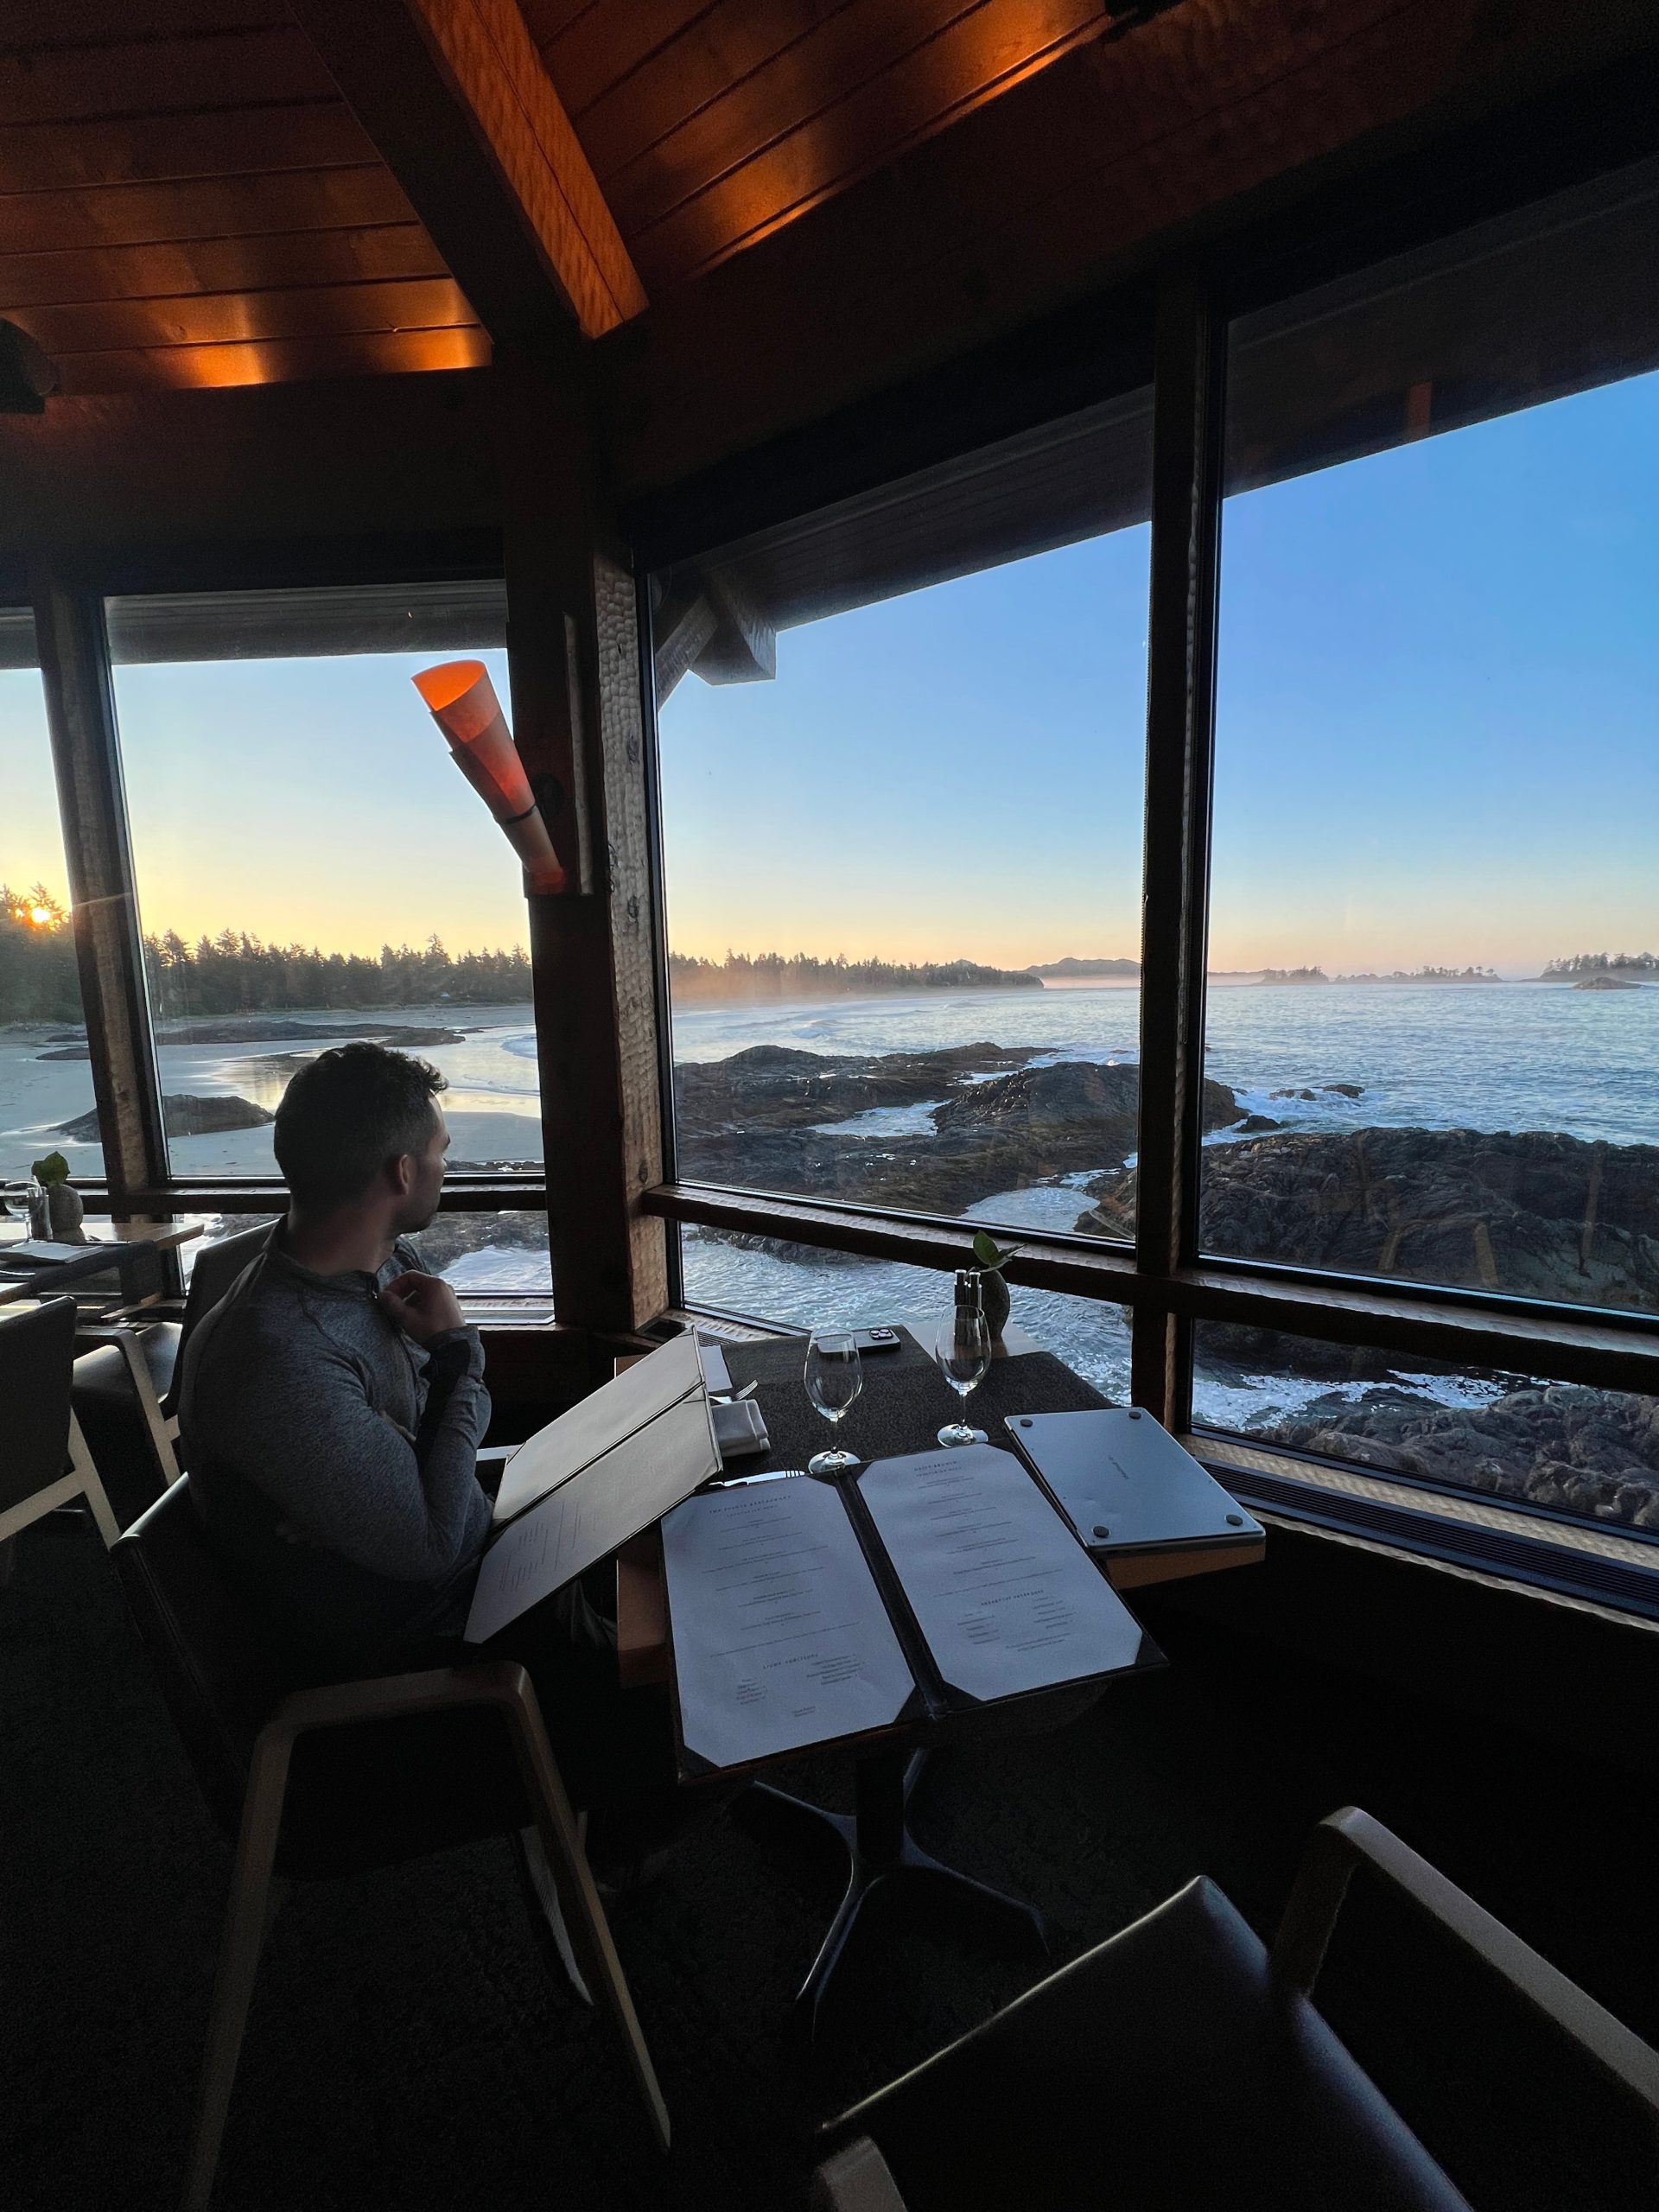 Looking out to sea from a restaurant in Tofino, Vancouver Island